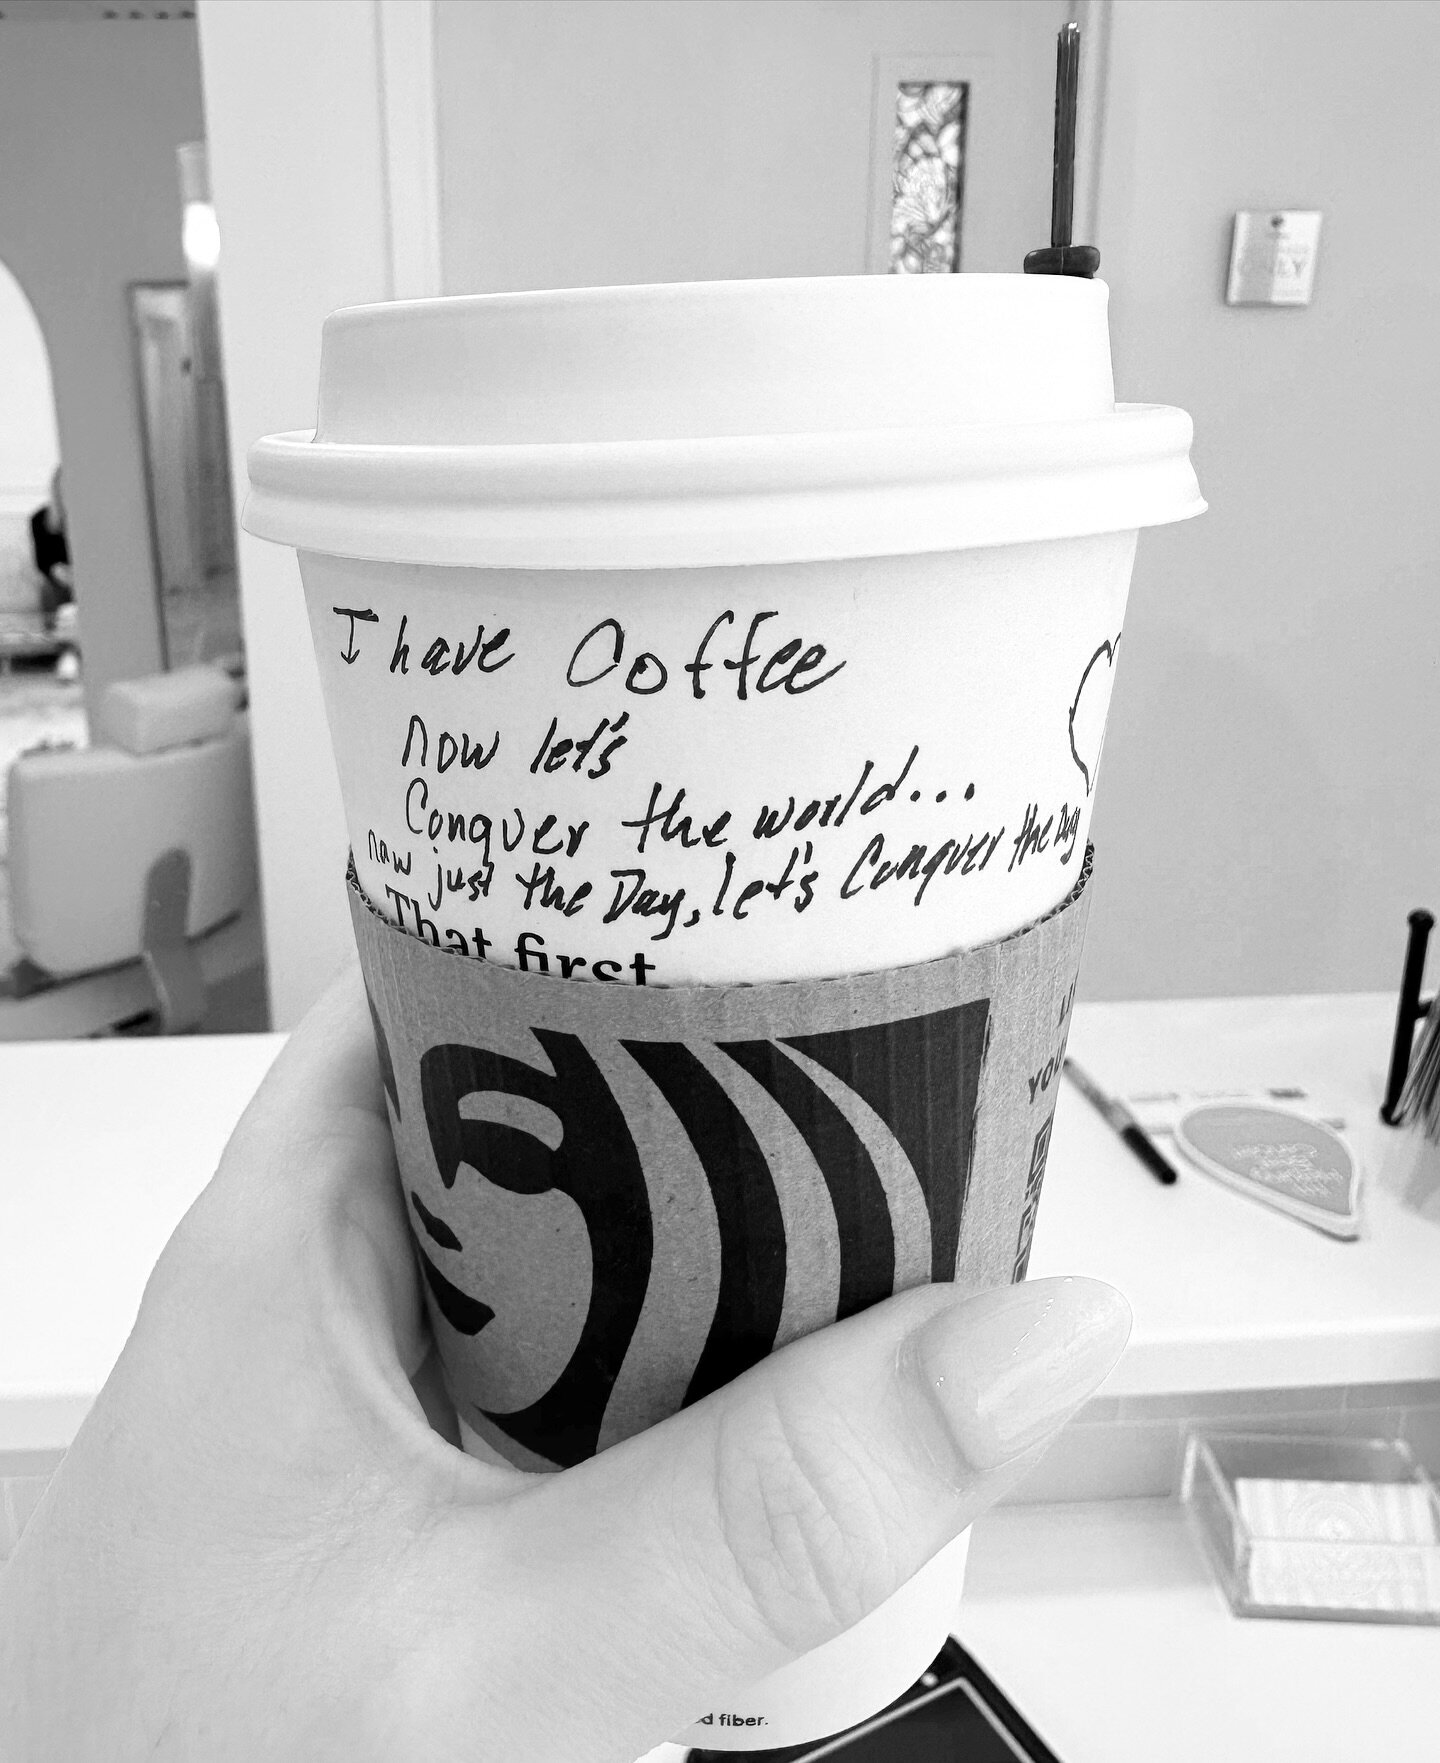 Cheers to clients who bring us coffee with empowering little notes! 🥂☕️😚 &ldquo;Let&rsquo;s conquer the day!&rdquo;